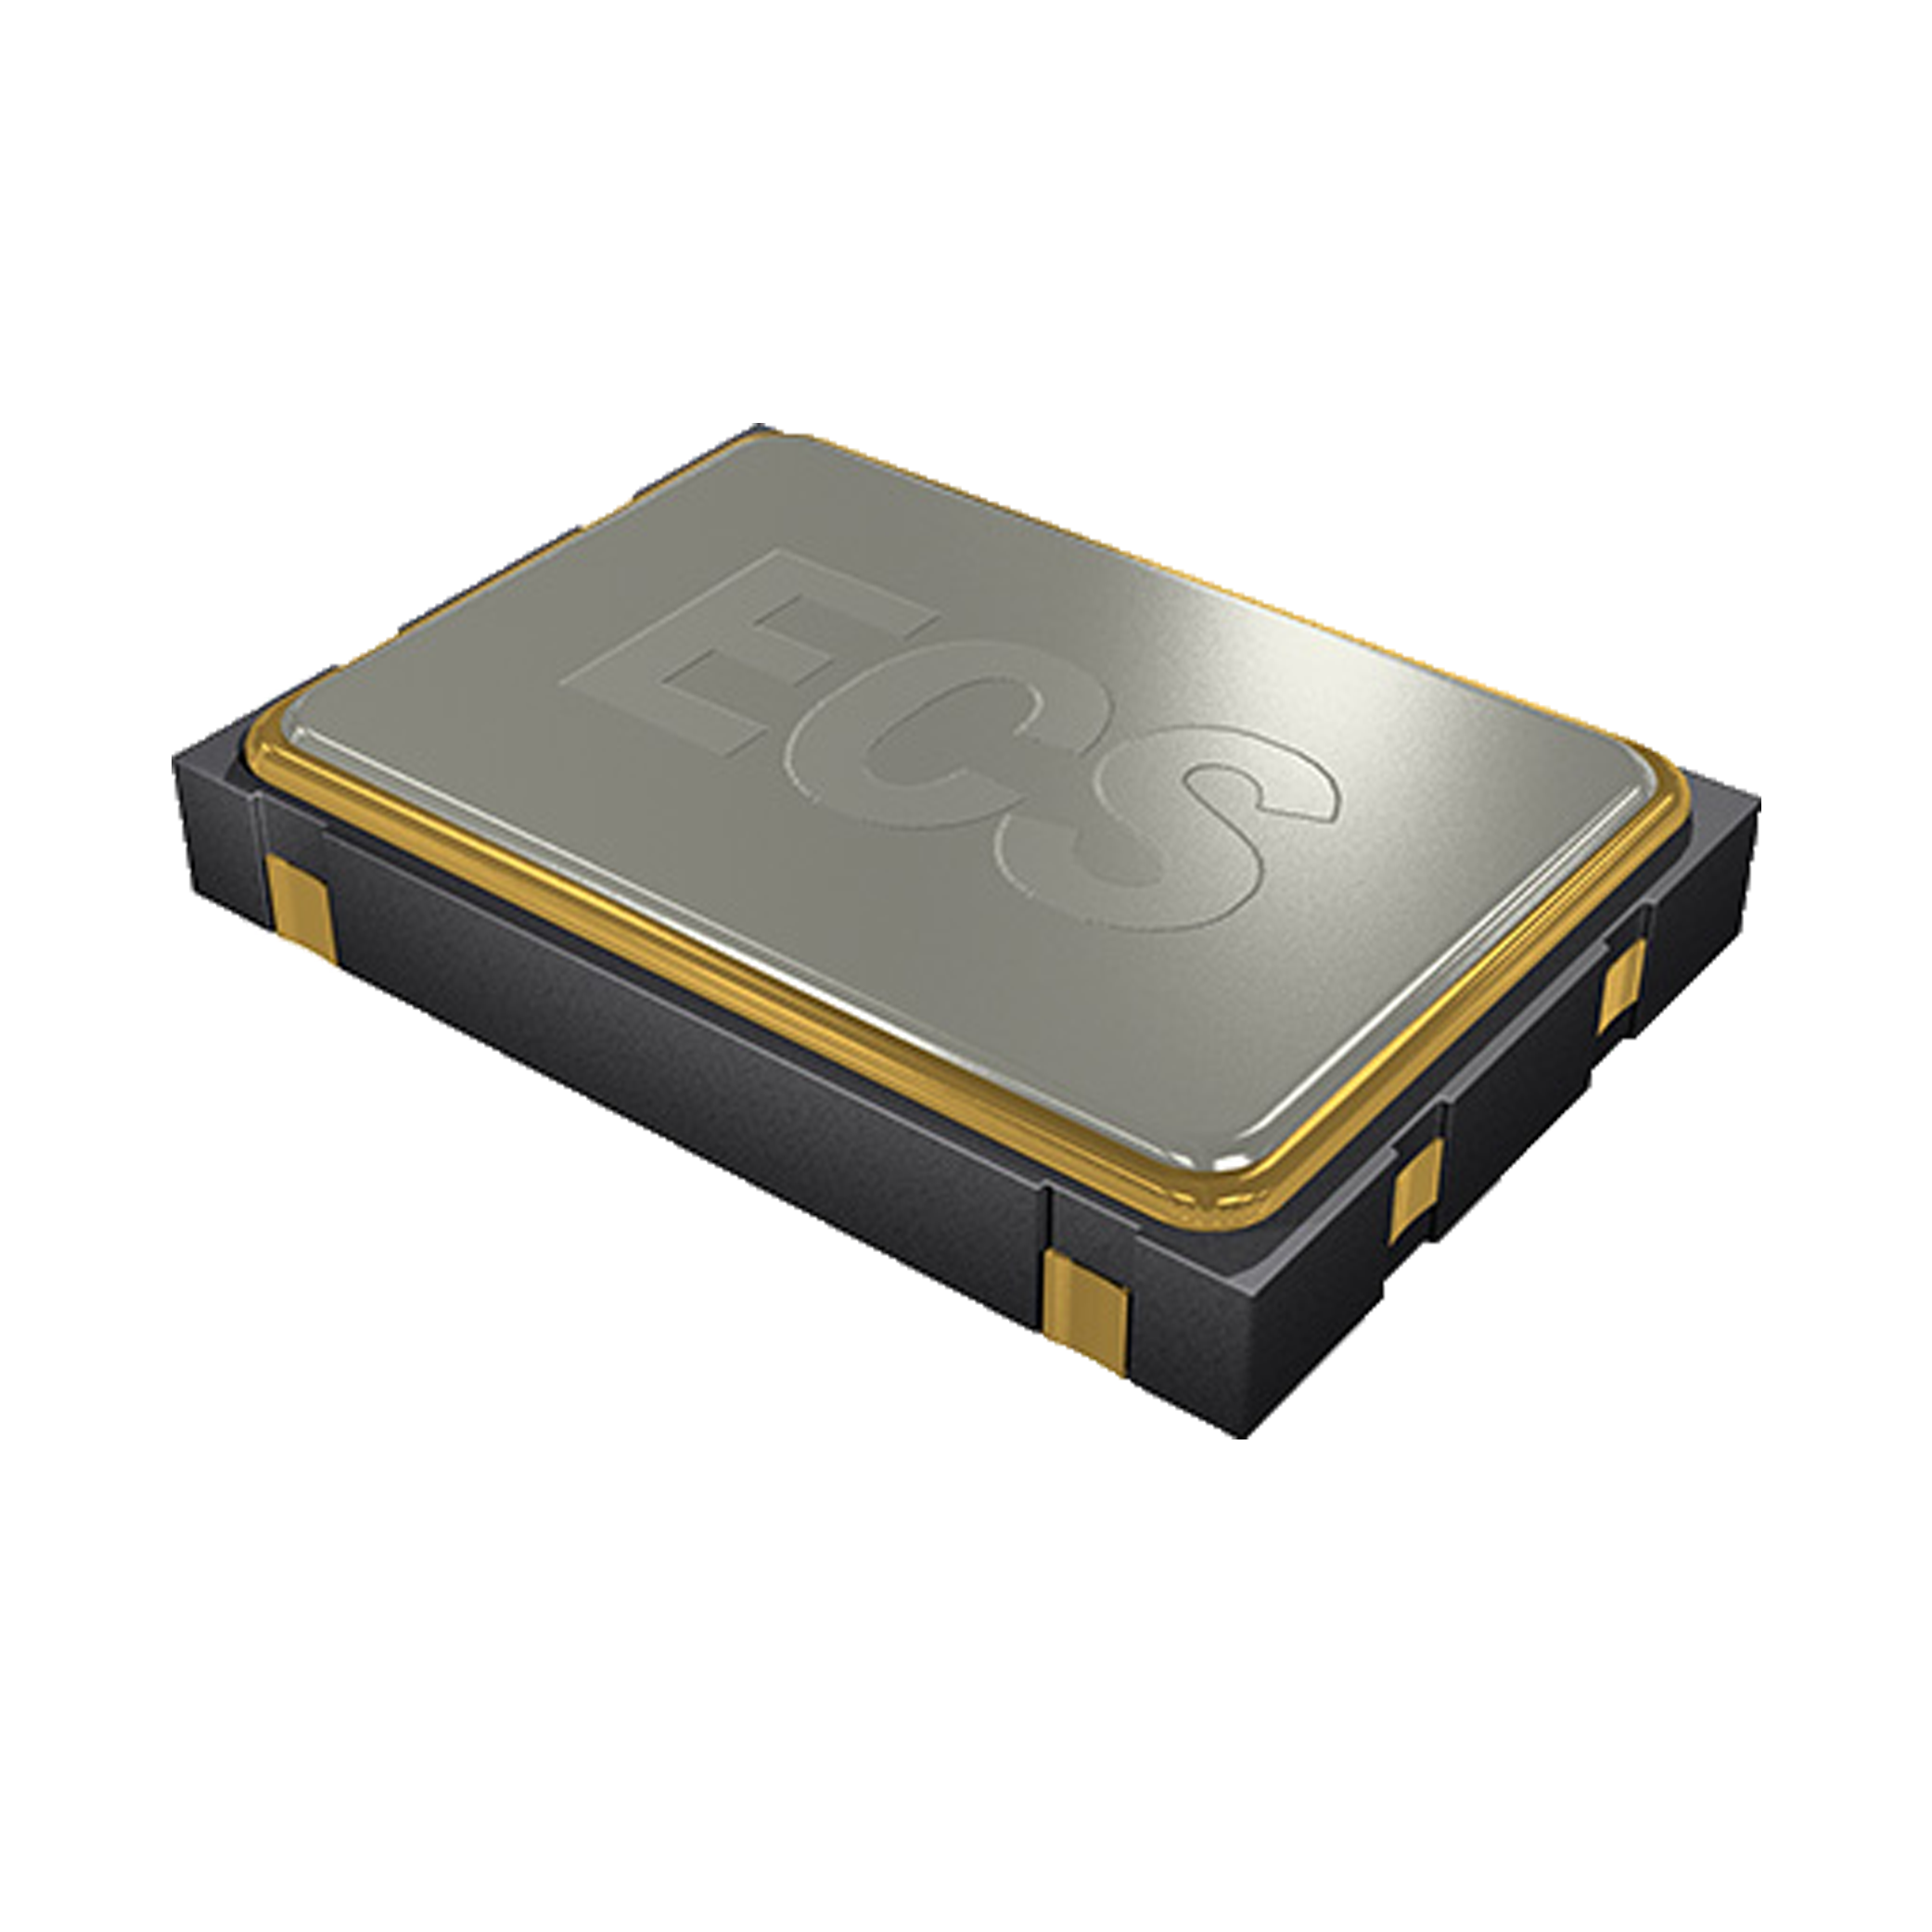 Product image for ECS-P75